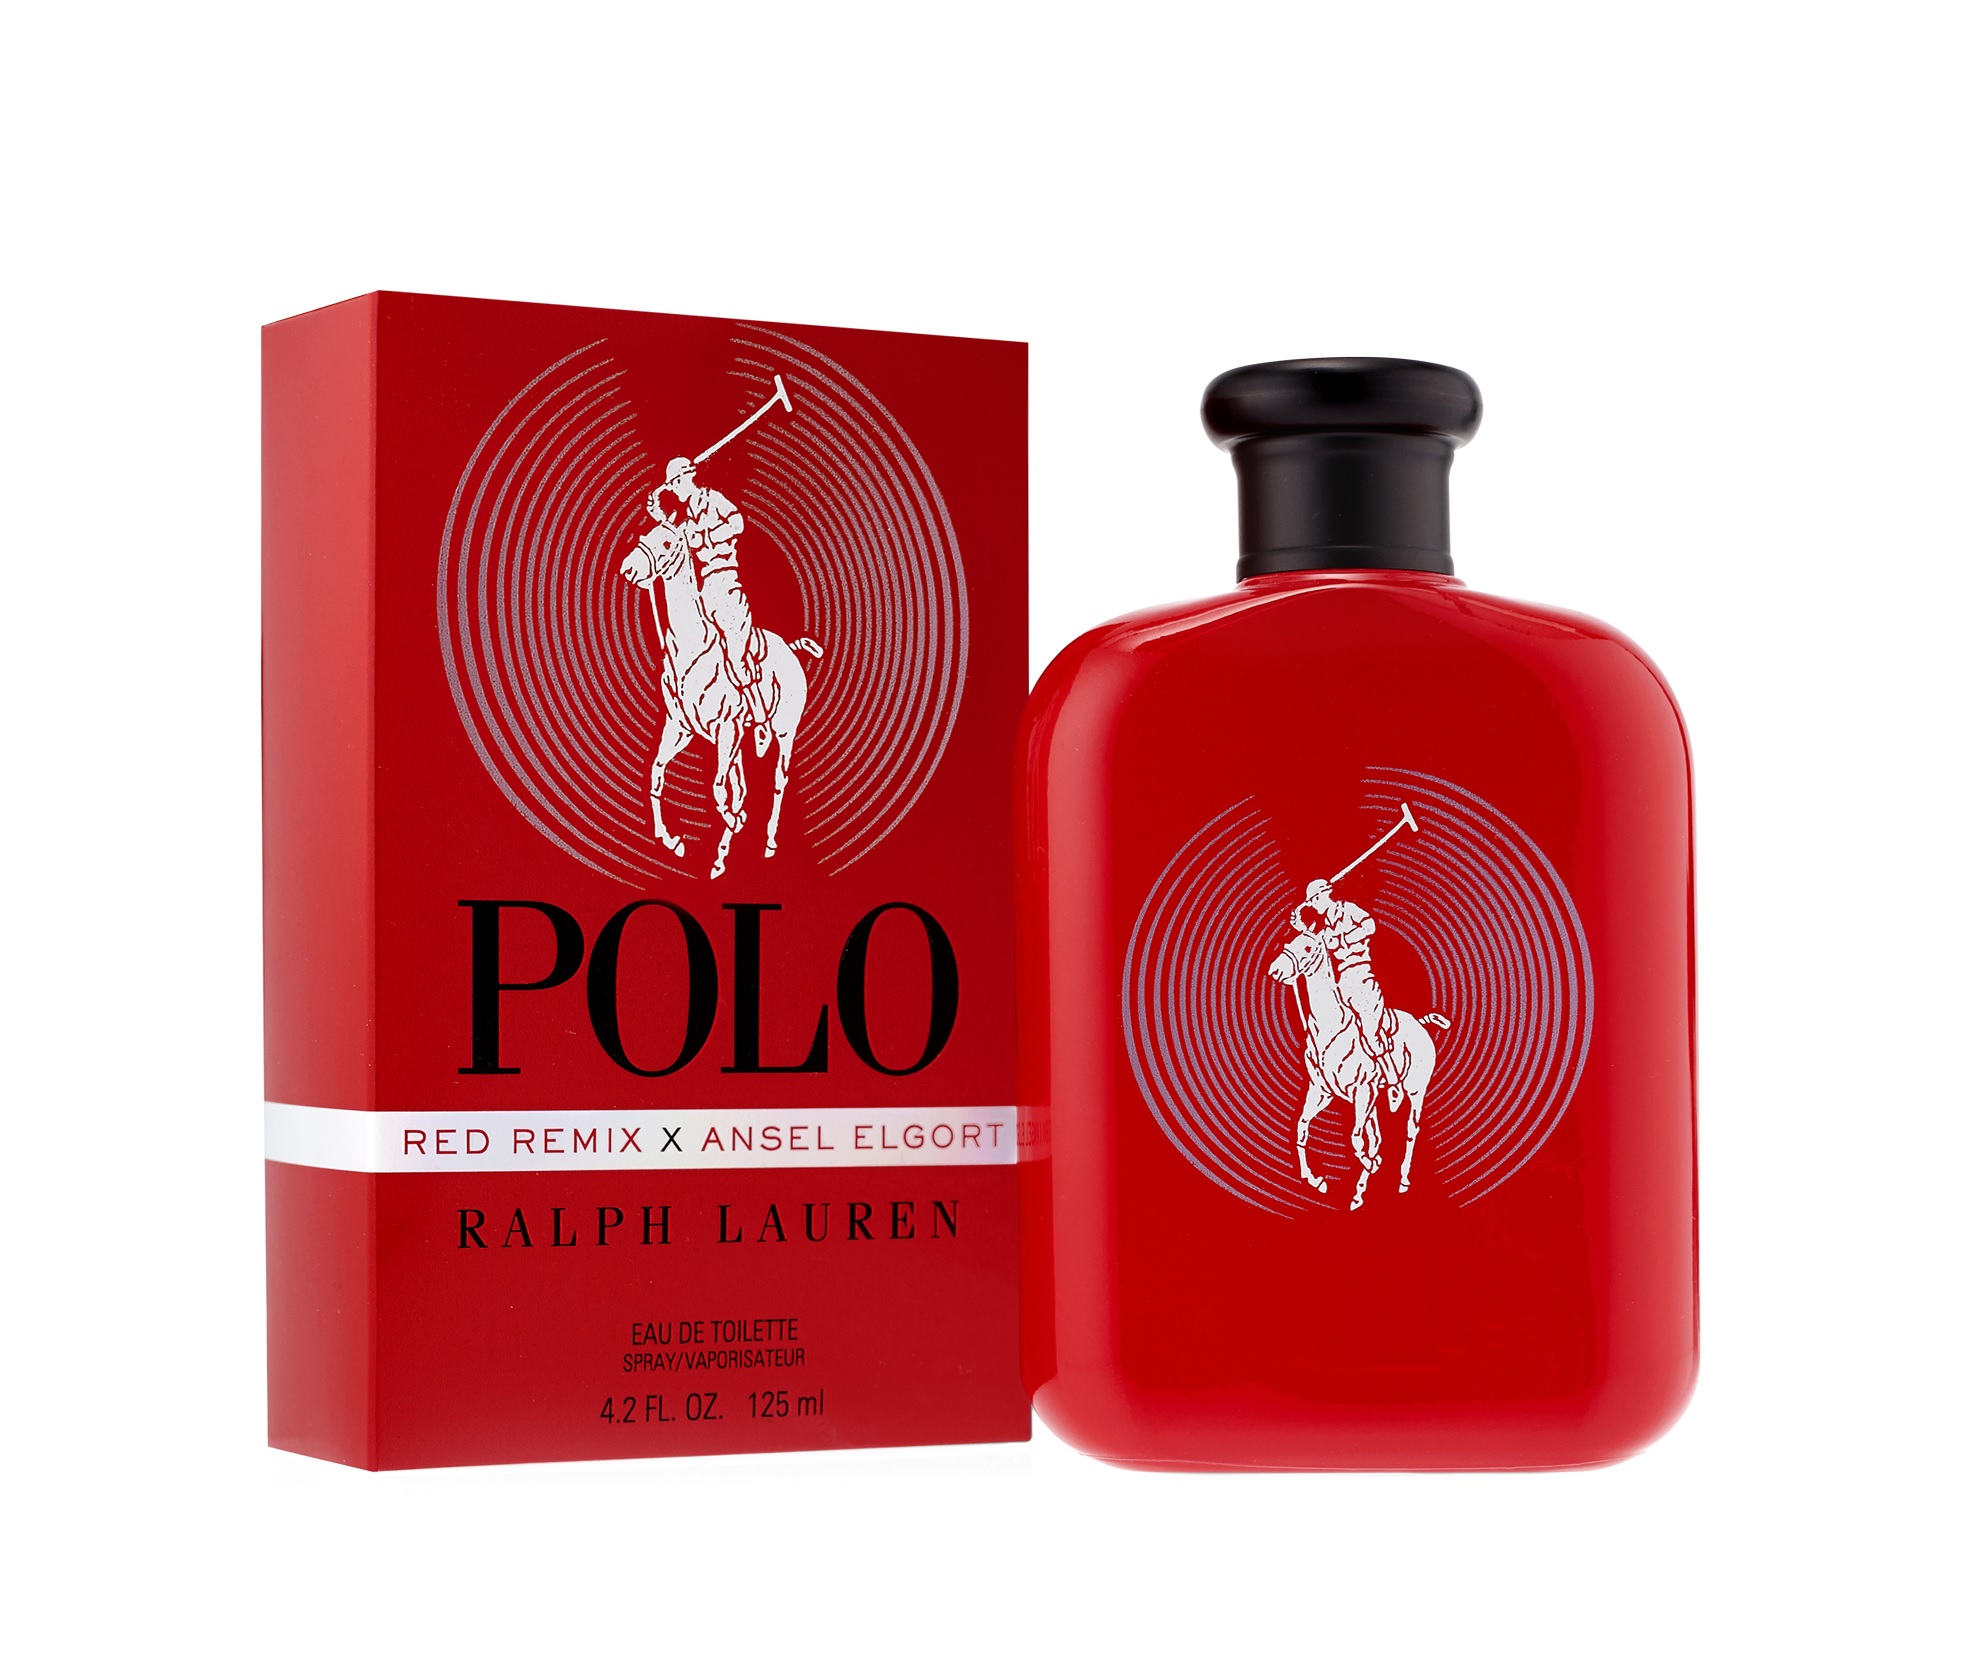 Polo Red Remix x Ansel Elgort